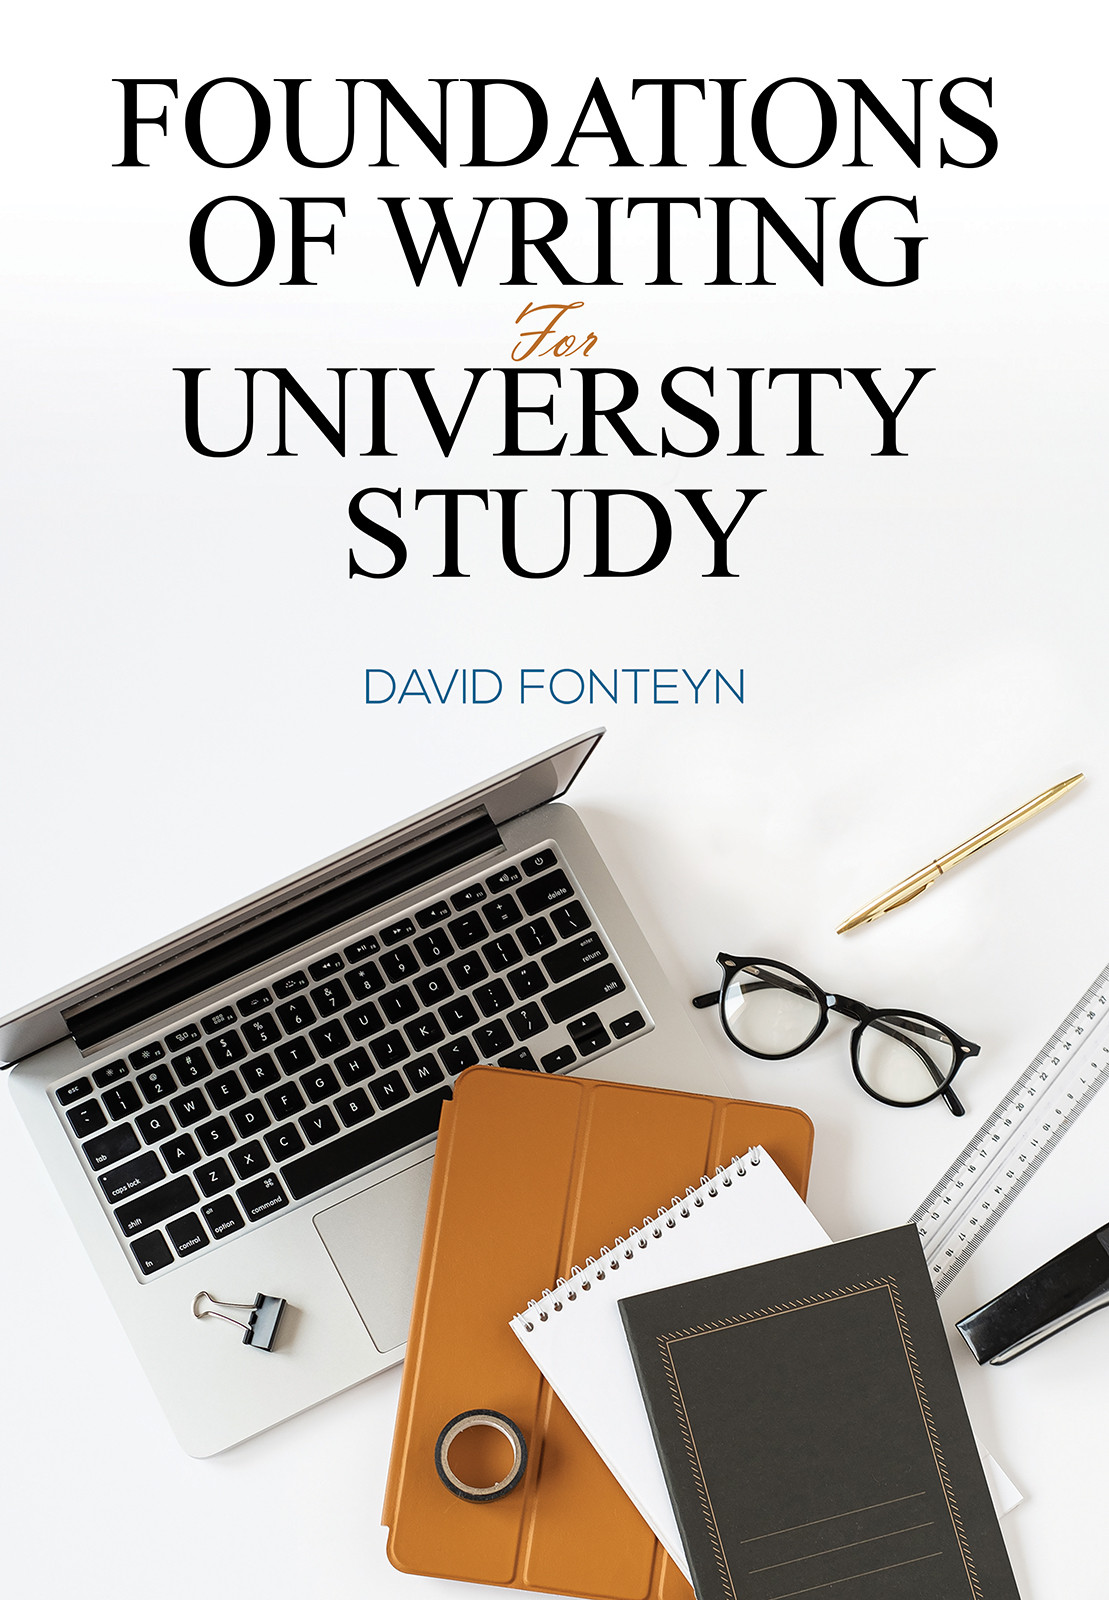 Foundations of Writing for University Study